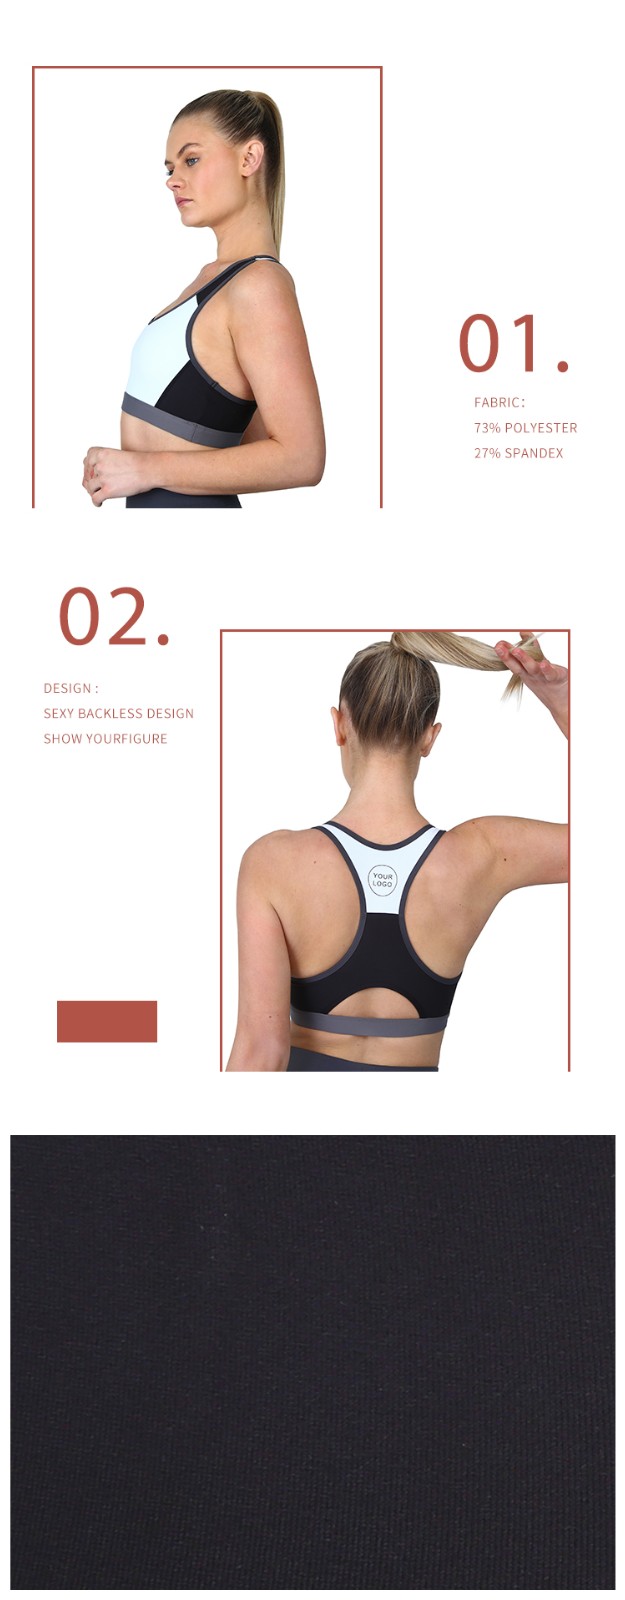 INGOR plain d cup sports bra on sale at the gym-5